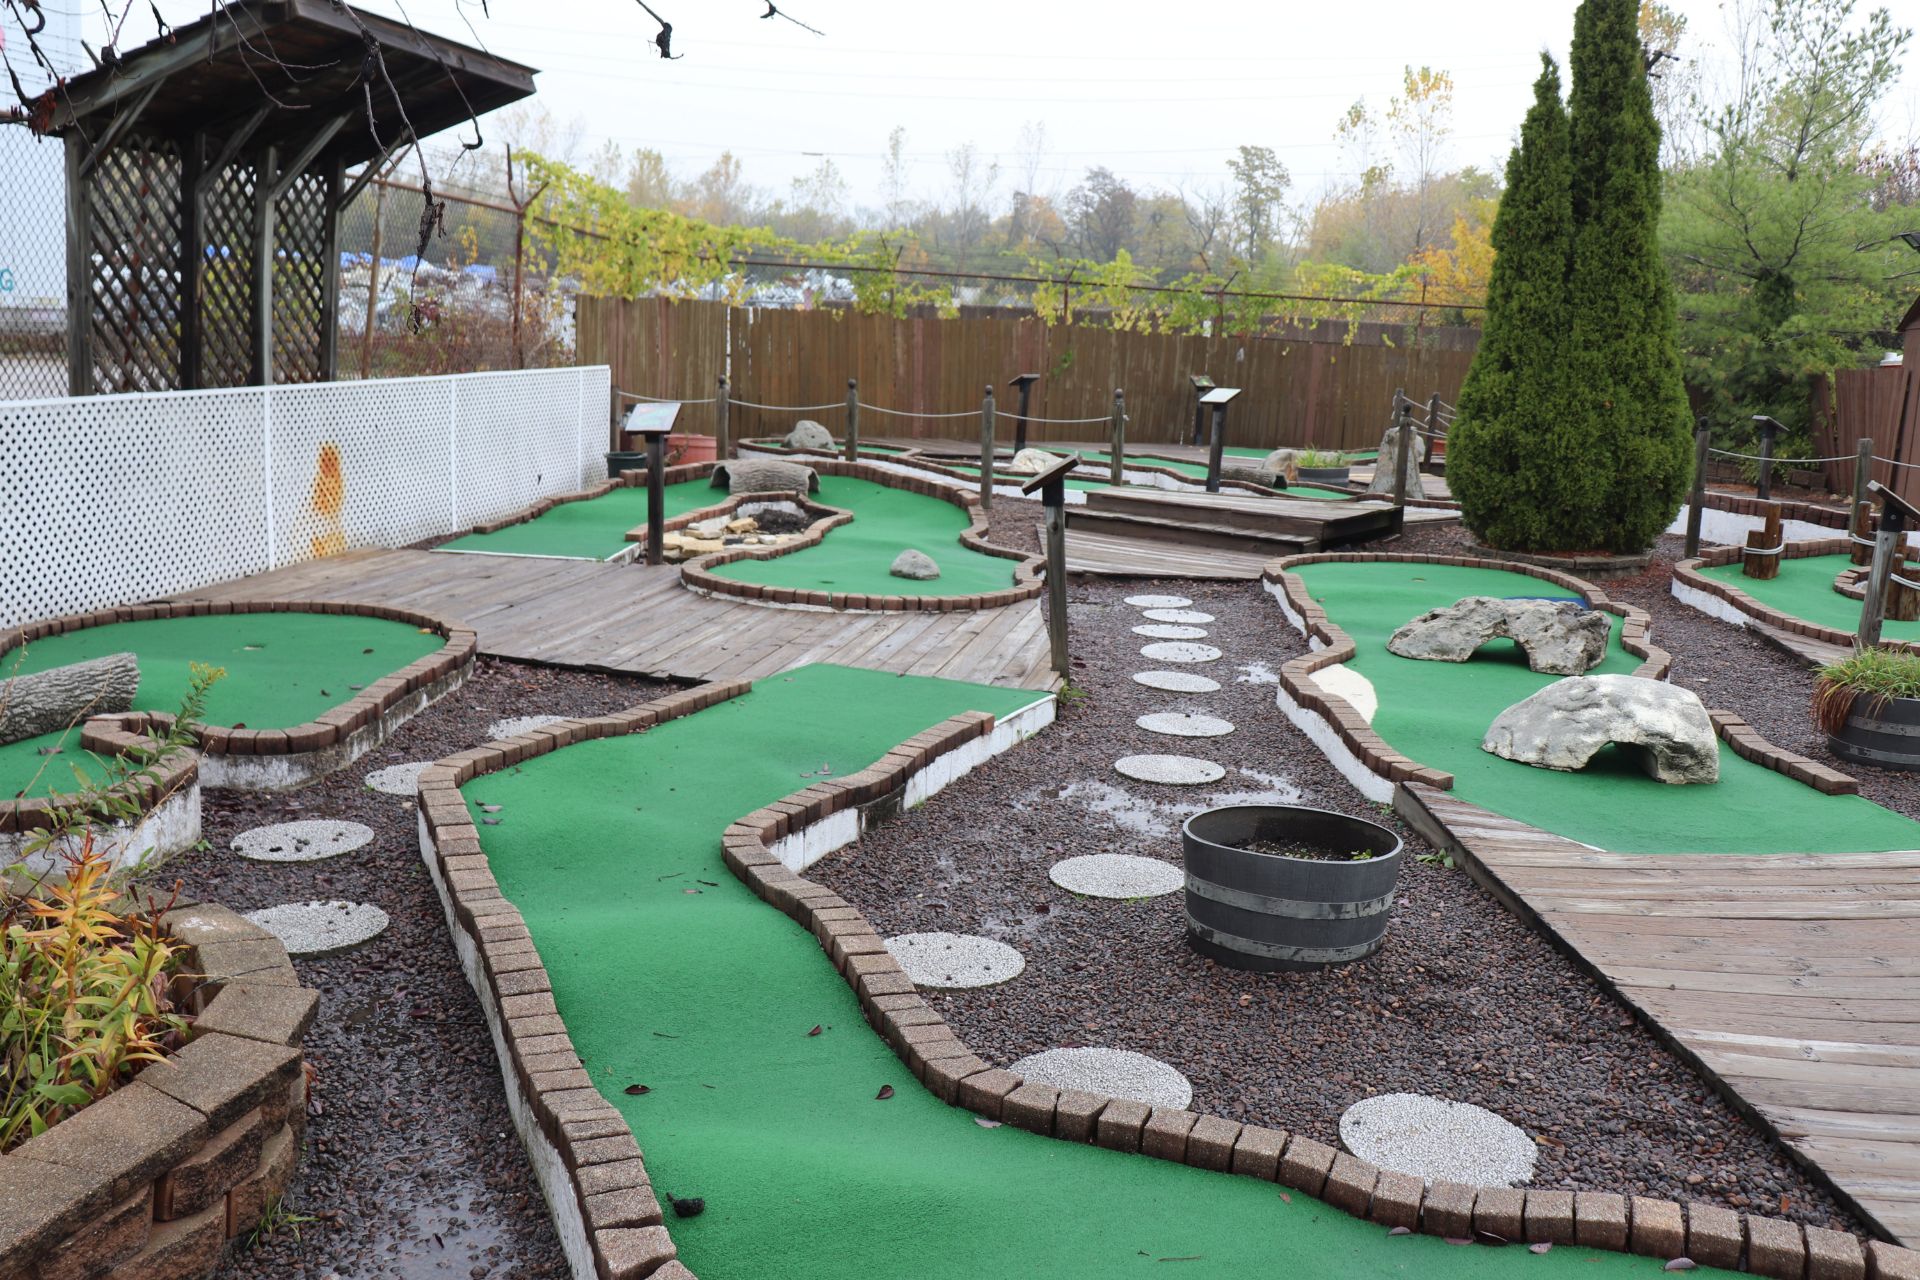 Modular 18-hole mini golf course by Micro Golf Cost of Wisconsin Inc., blueprints provided, carpet p - Image 6 of 9